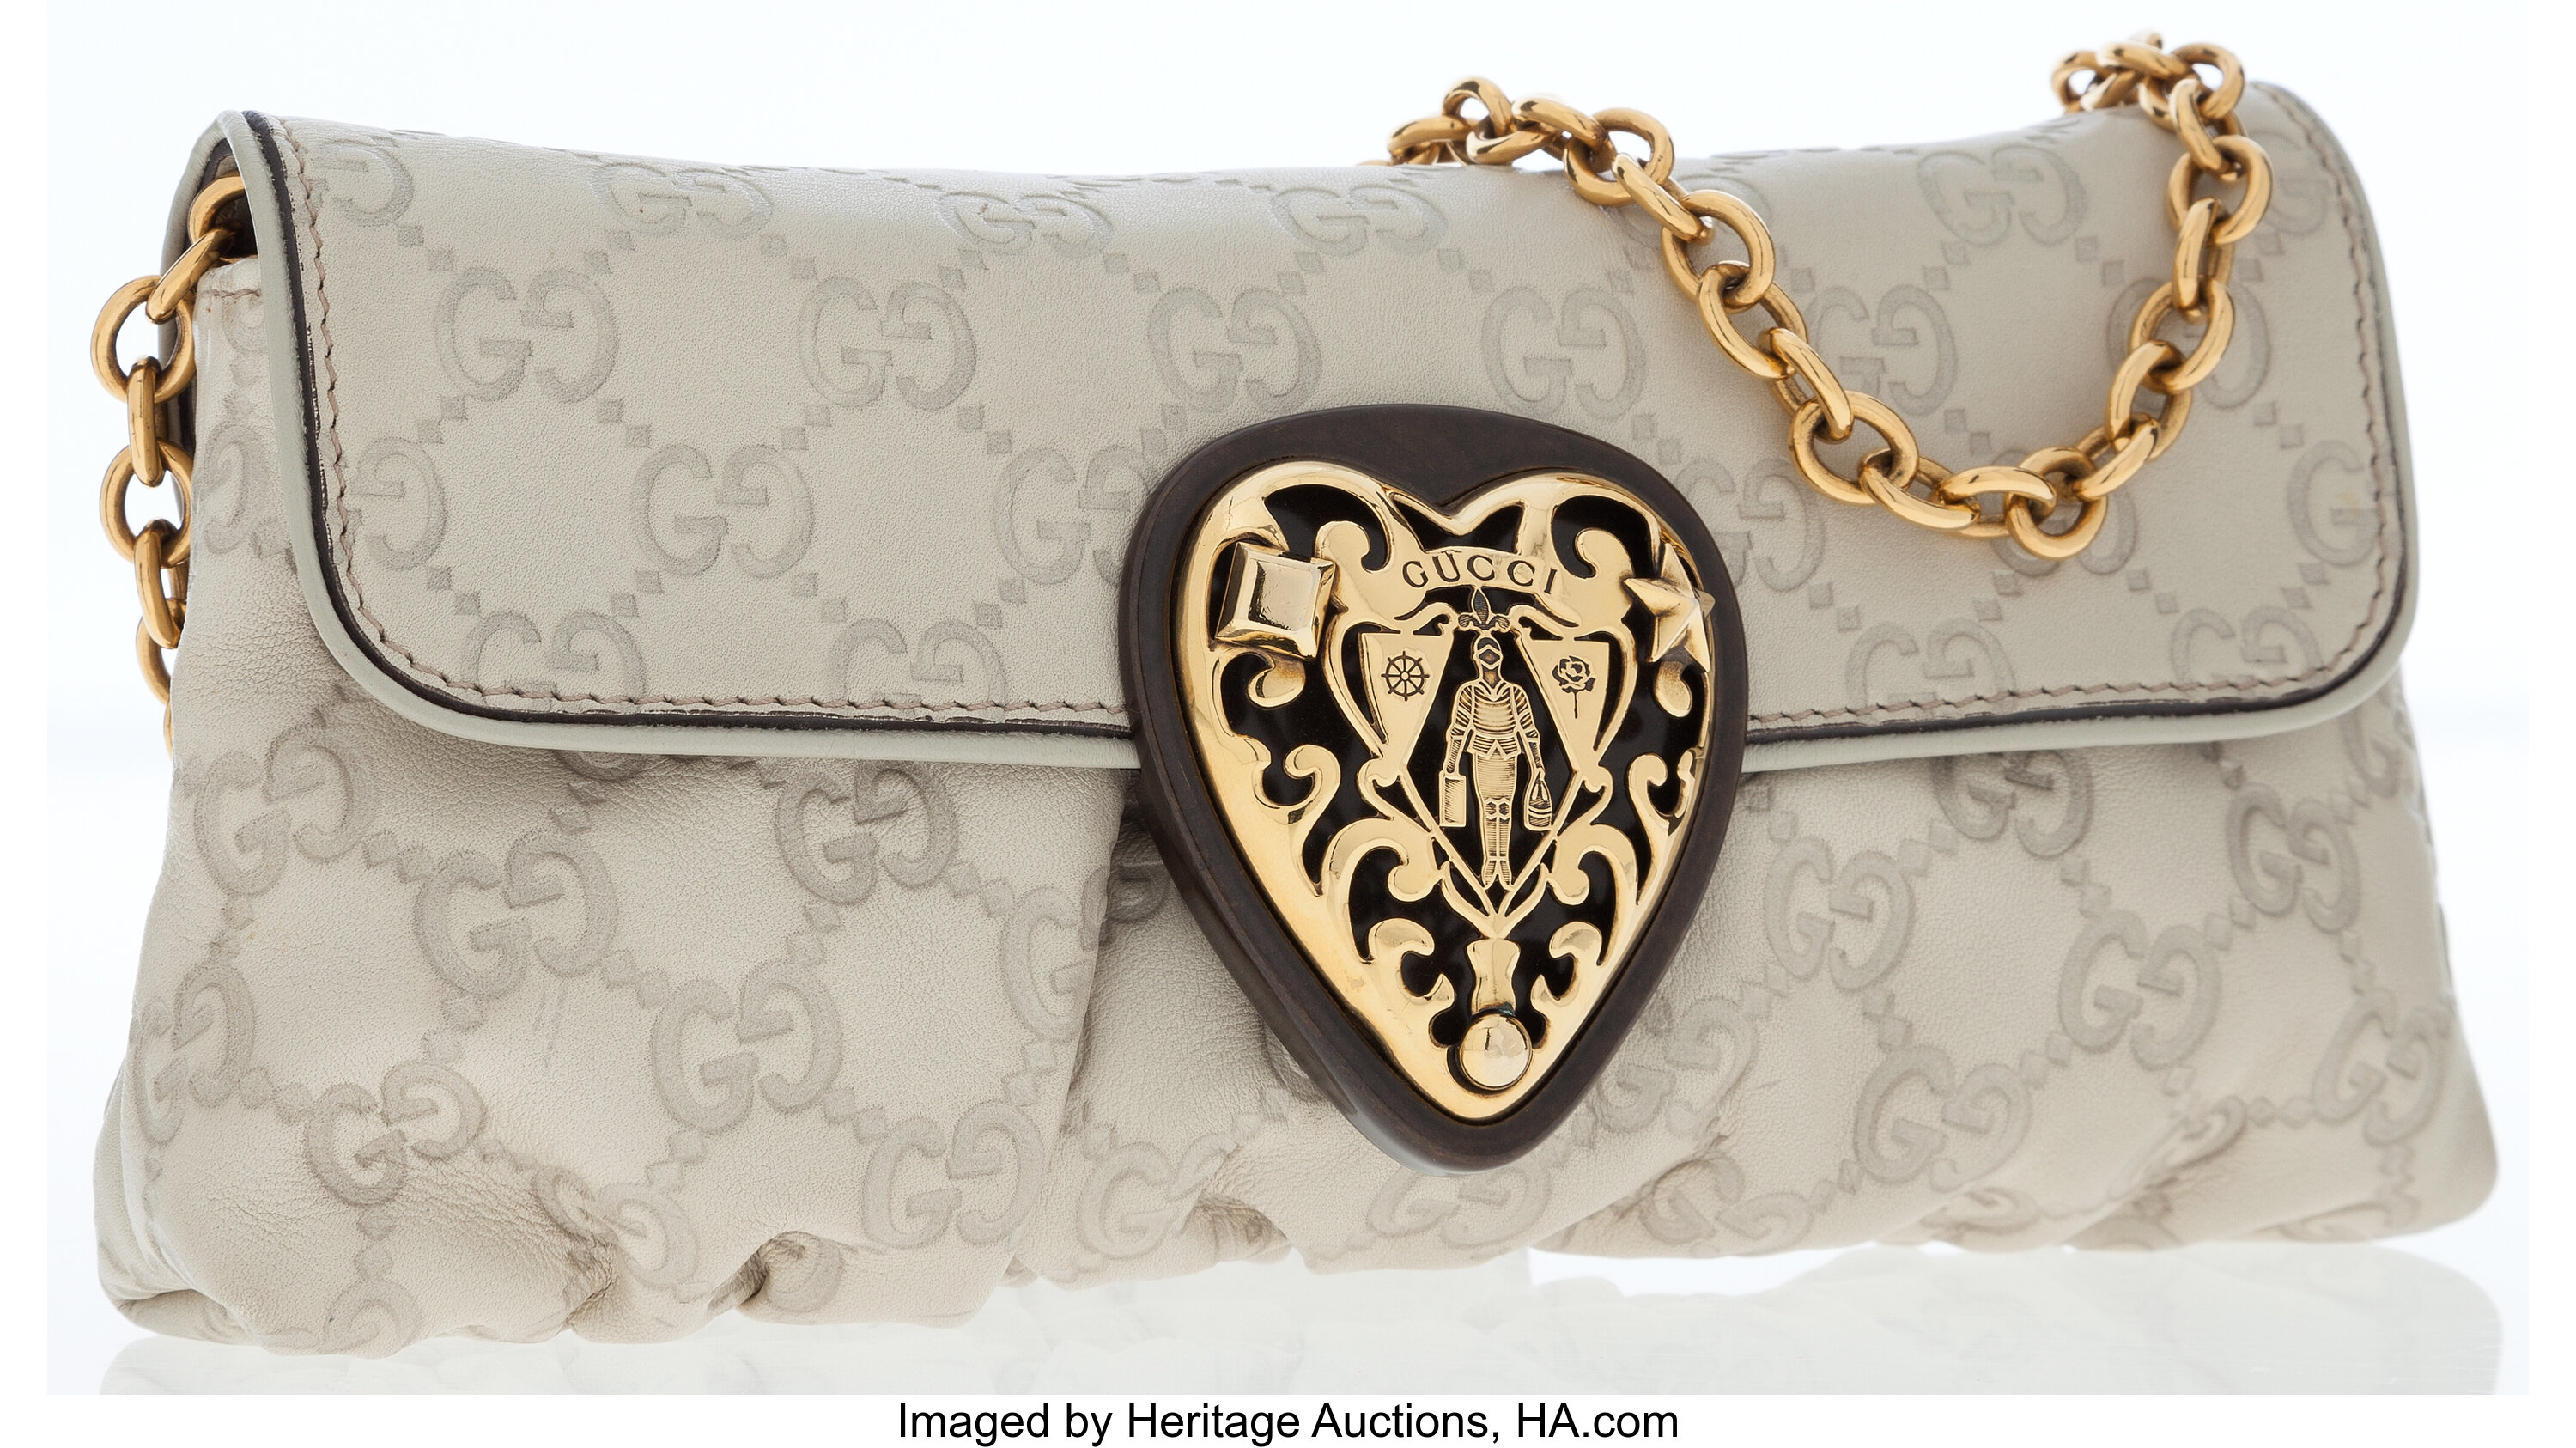 Gucci Beige Leather Monogram Shoulder Bag with Gold Heart Detail. | Lot  #79051 | Heritage Auctions